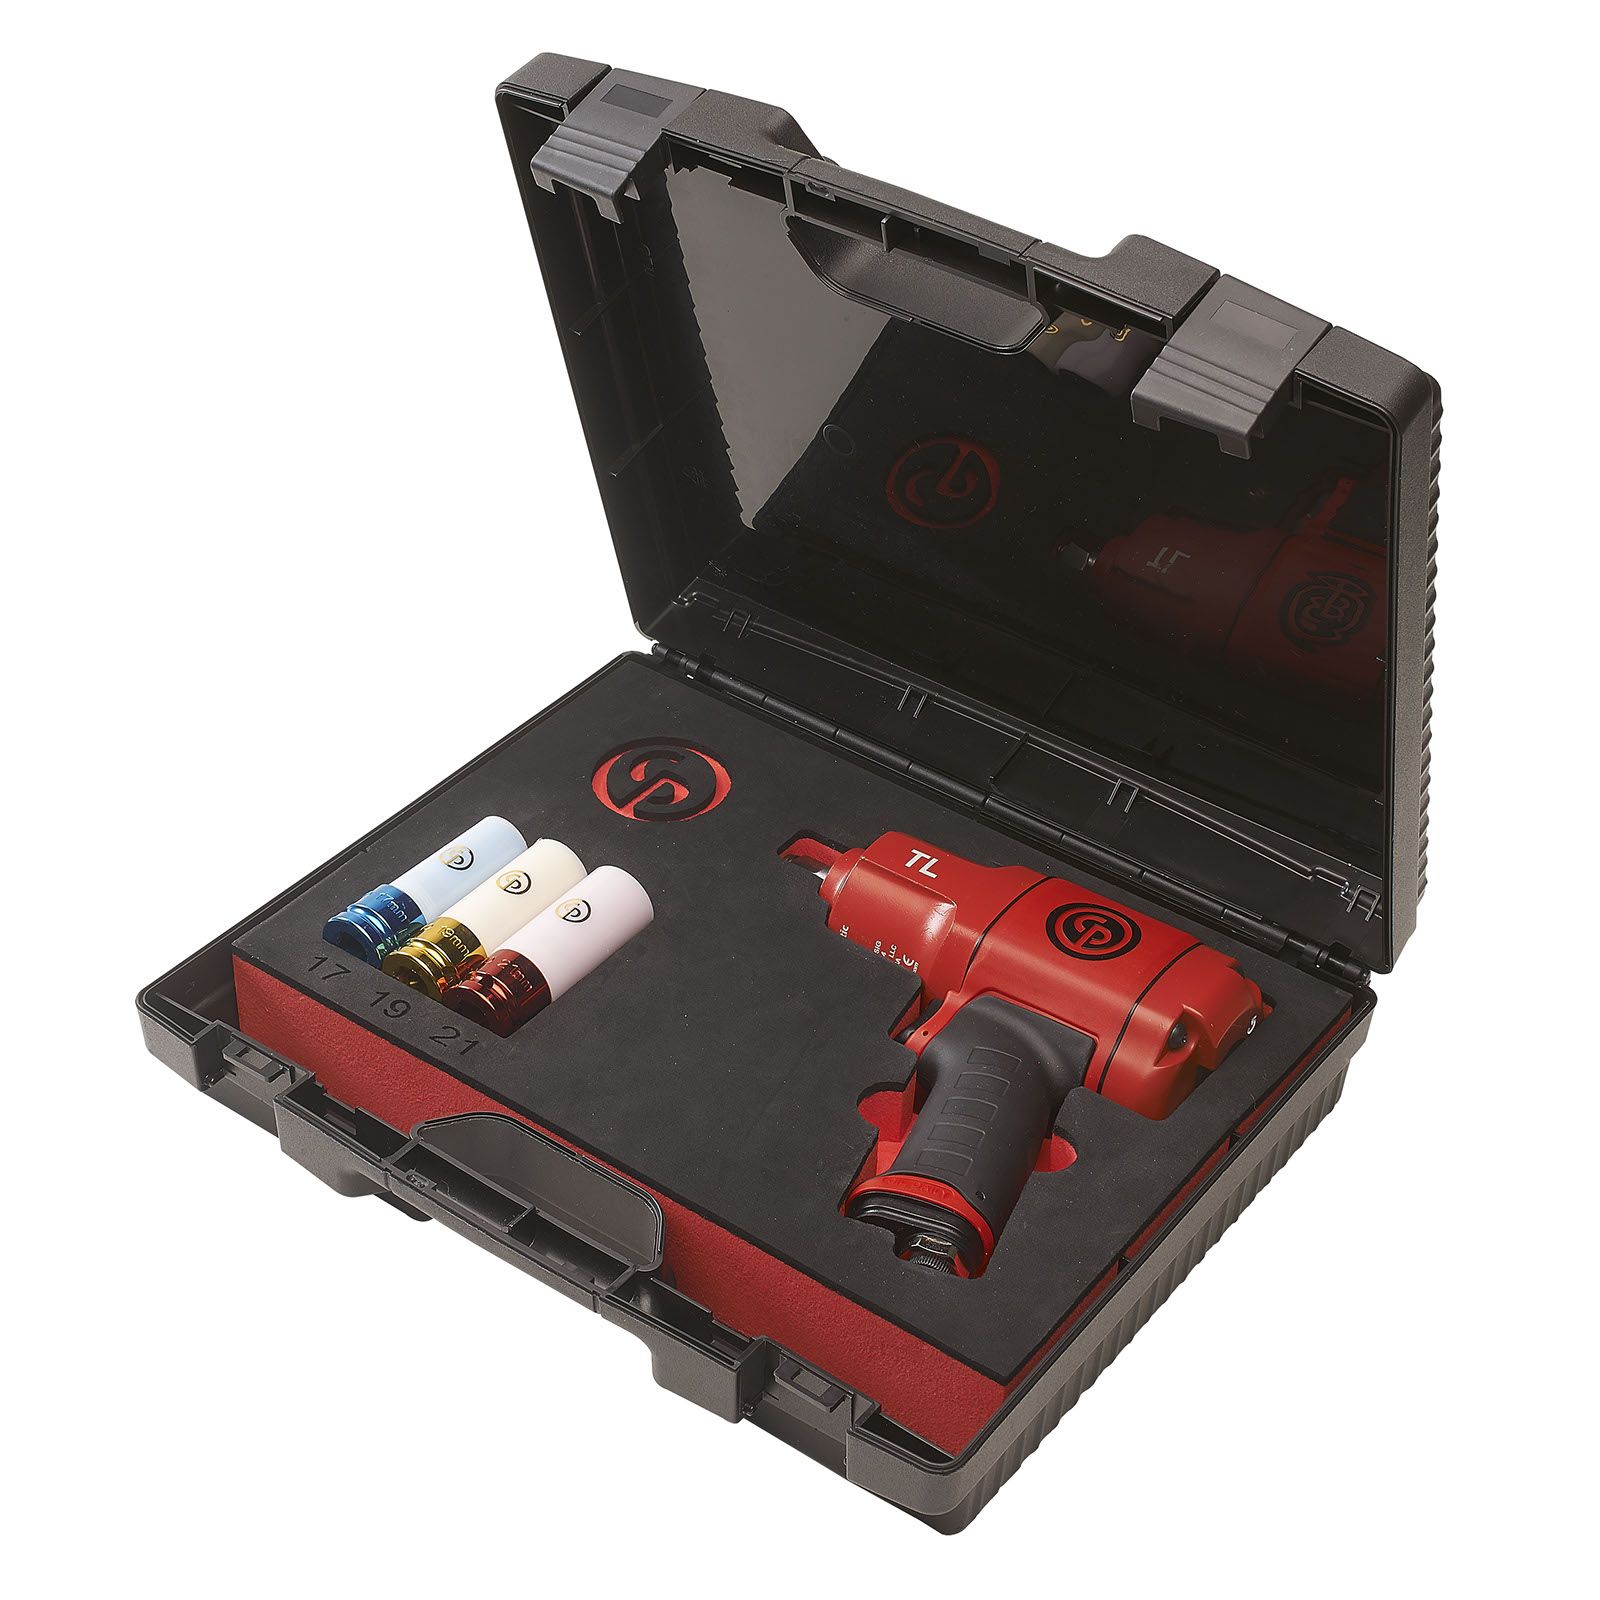 CP7748TL IMPACT WRENCH productfoto